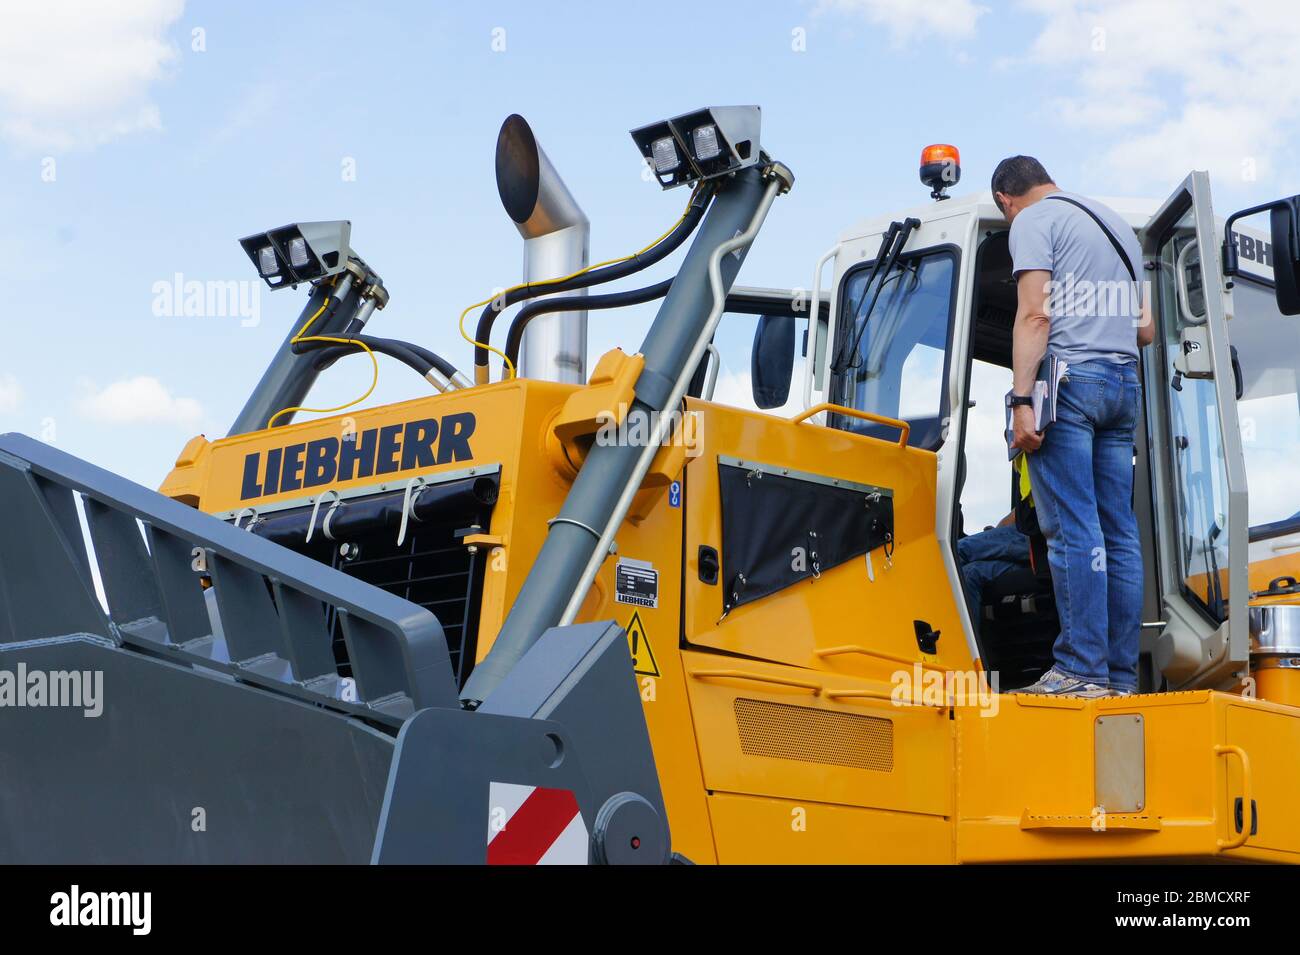 Moscow, Russia - June 4th 2016: Two men inspecting operator cabin of 50 tonn Liebherr bulldozer, going through basic dozer functions. Stock Photo